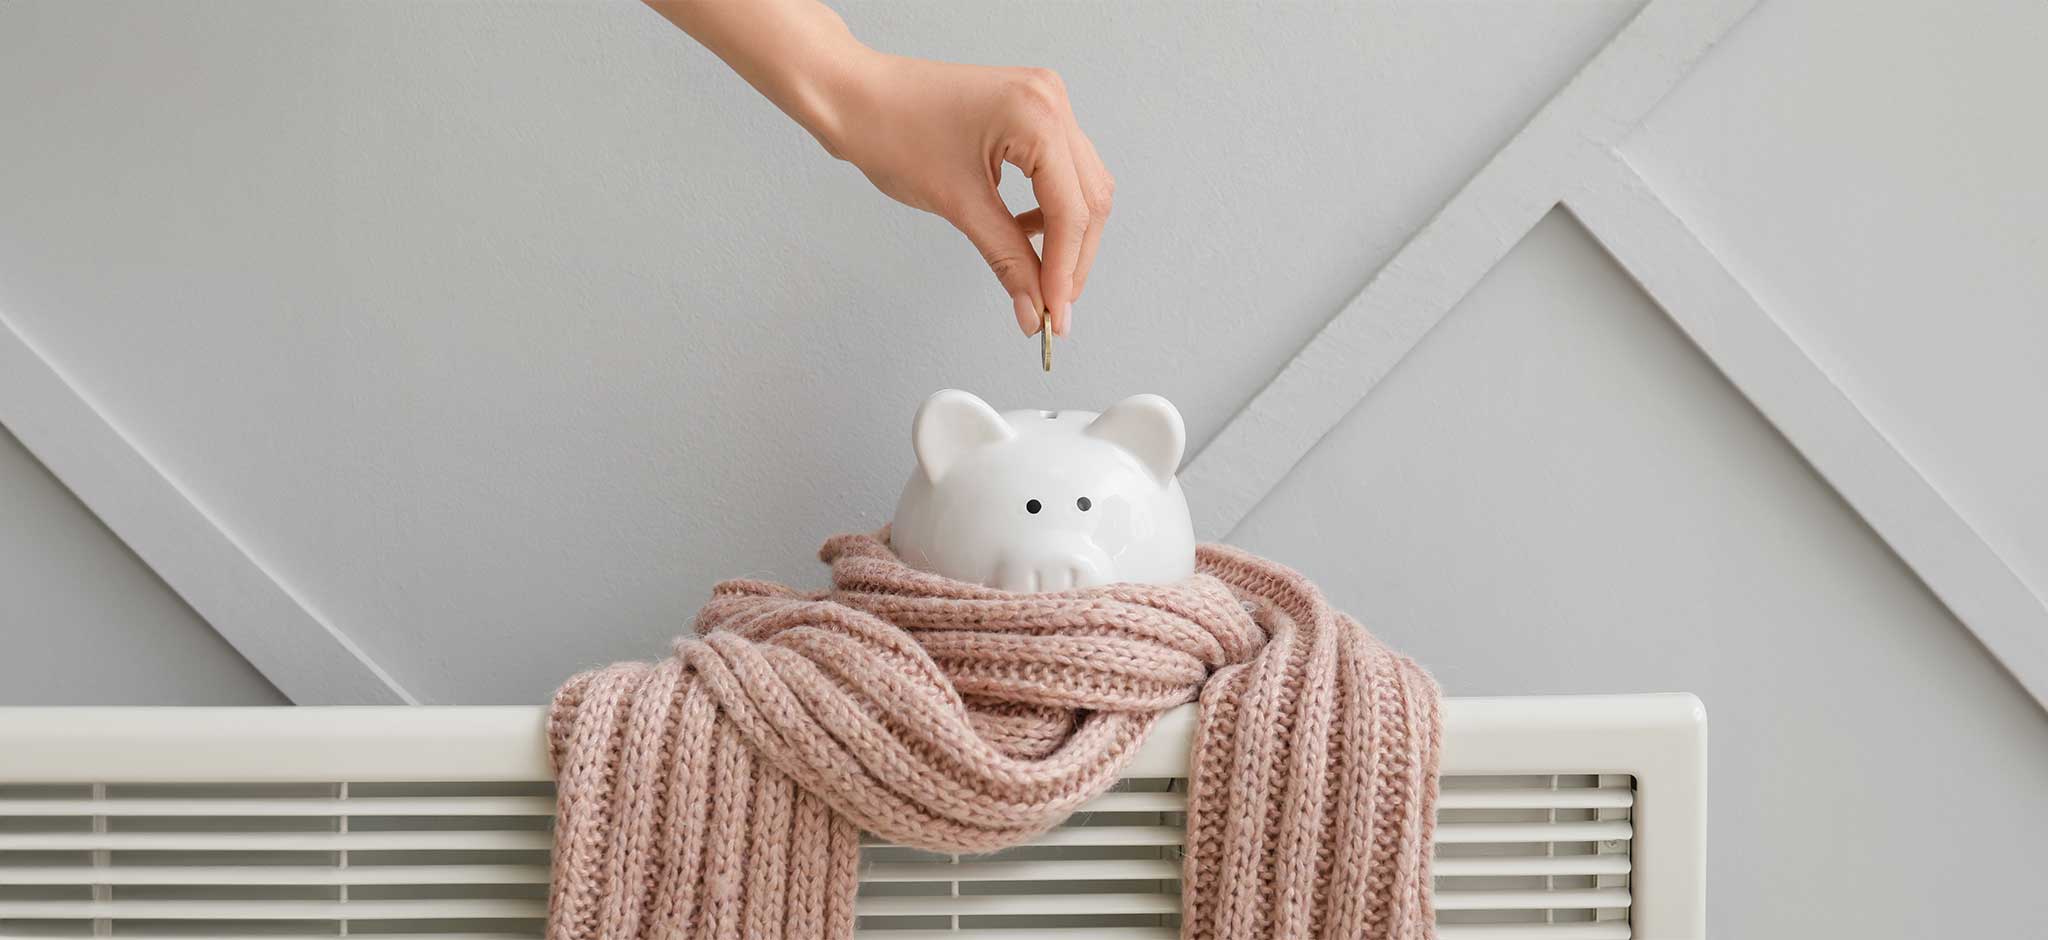 How To Save Energy and Stay Warm on a Budget